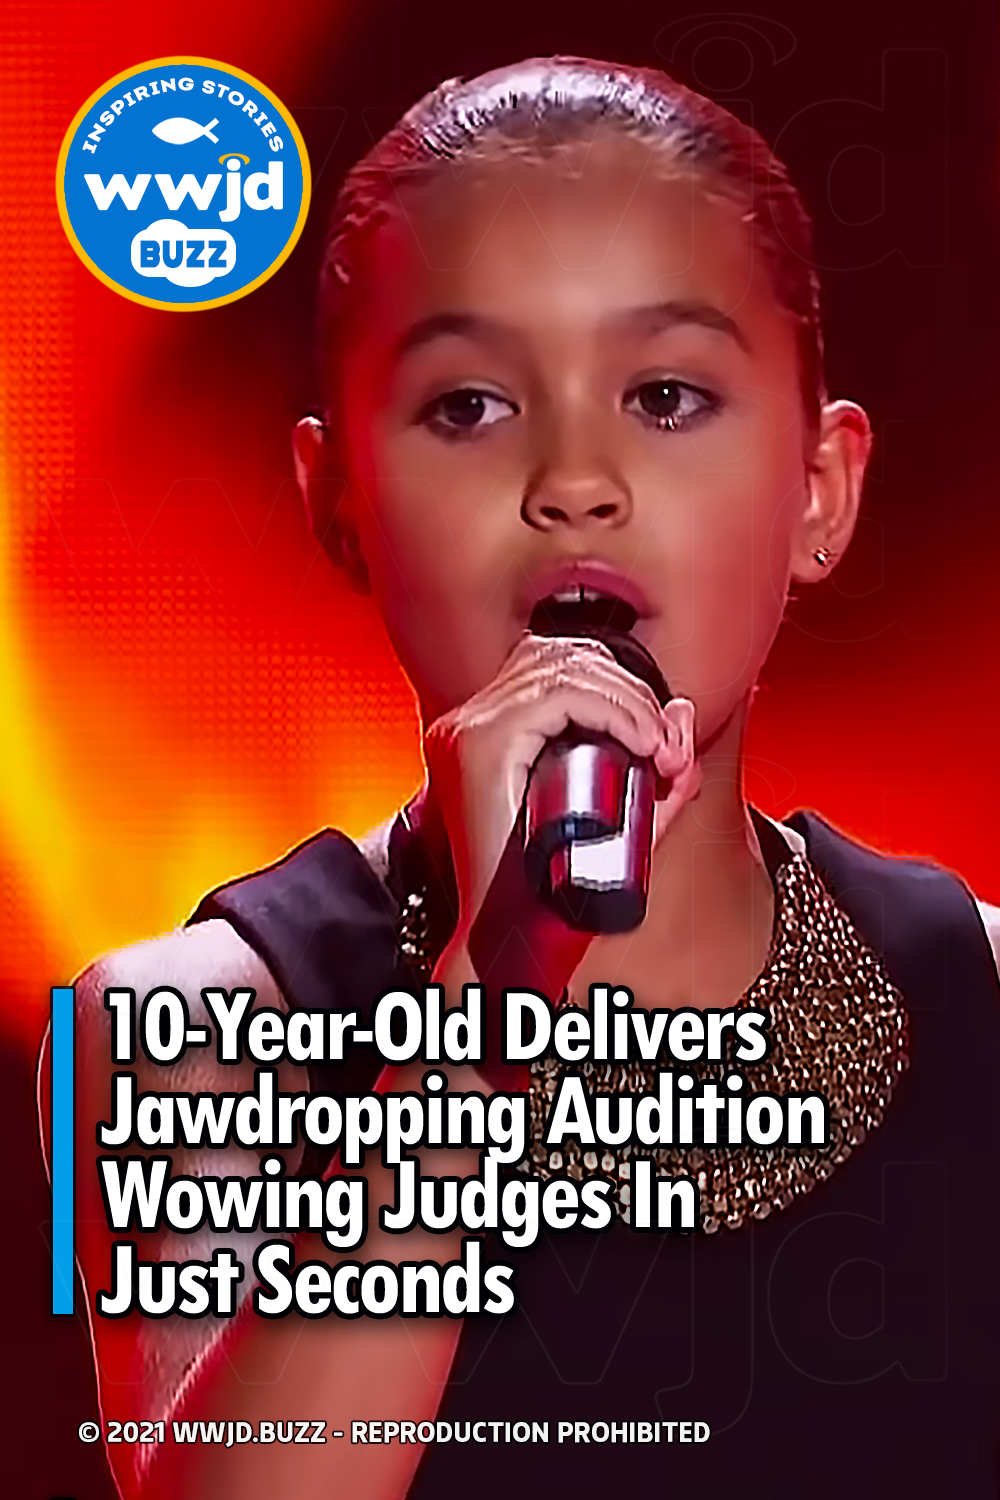 10-Year-Old Delivers Jawdropping Audition Wowing Judges In Just Seconds